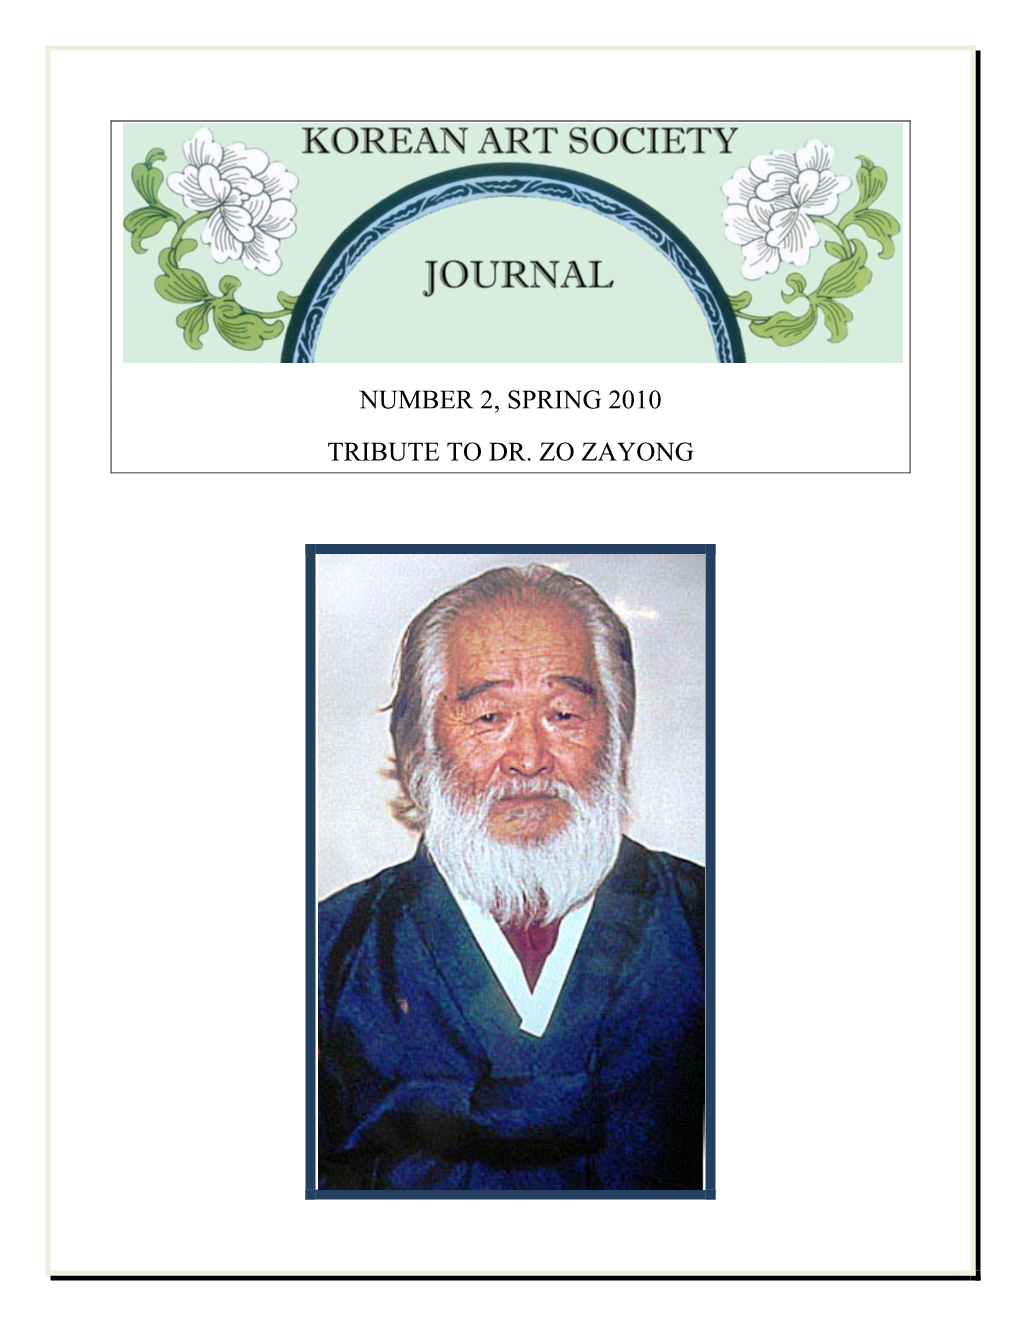 Number 2, Spring 2010 Tribute to Dr. Zo Zayong